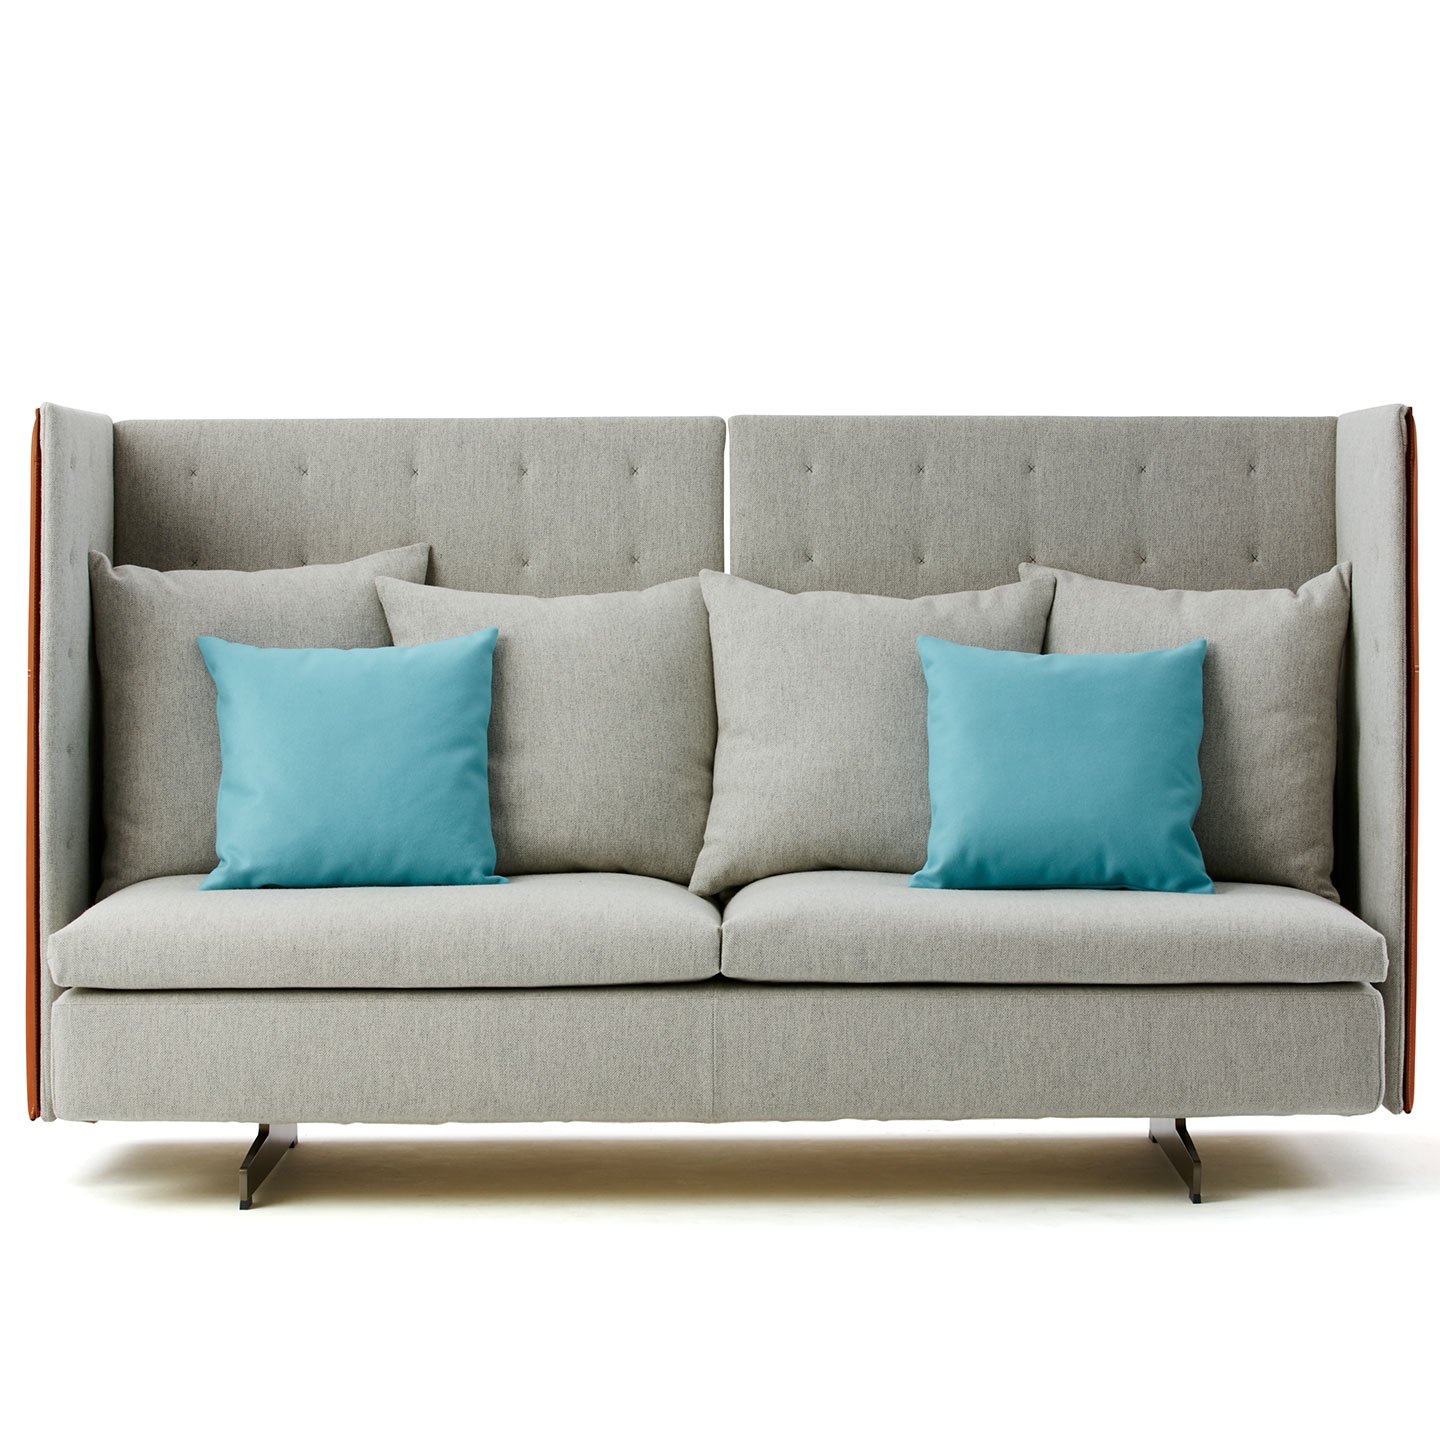 Haworth GranTorino HB Booth in grey color with tall back and grey and blue throw pillows